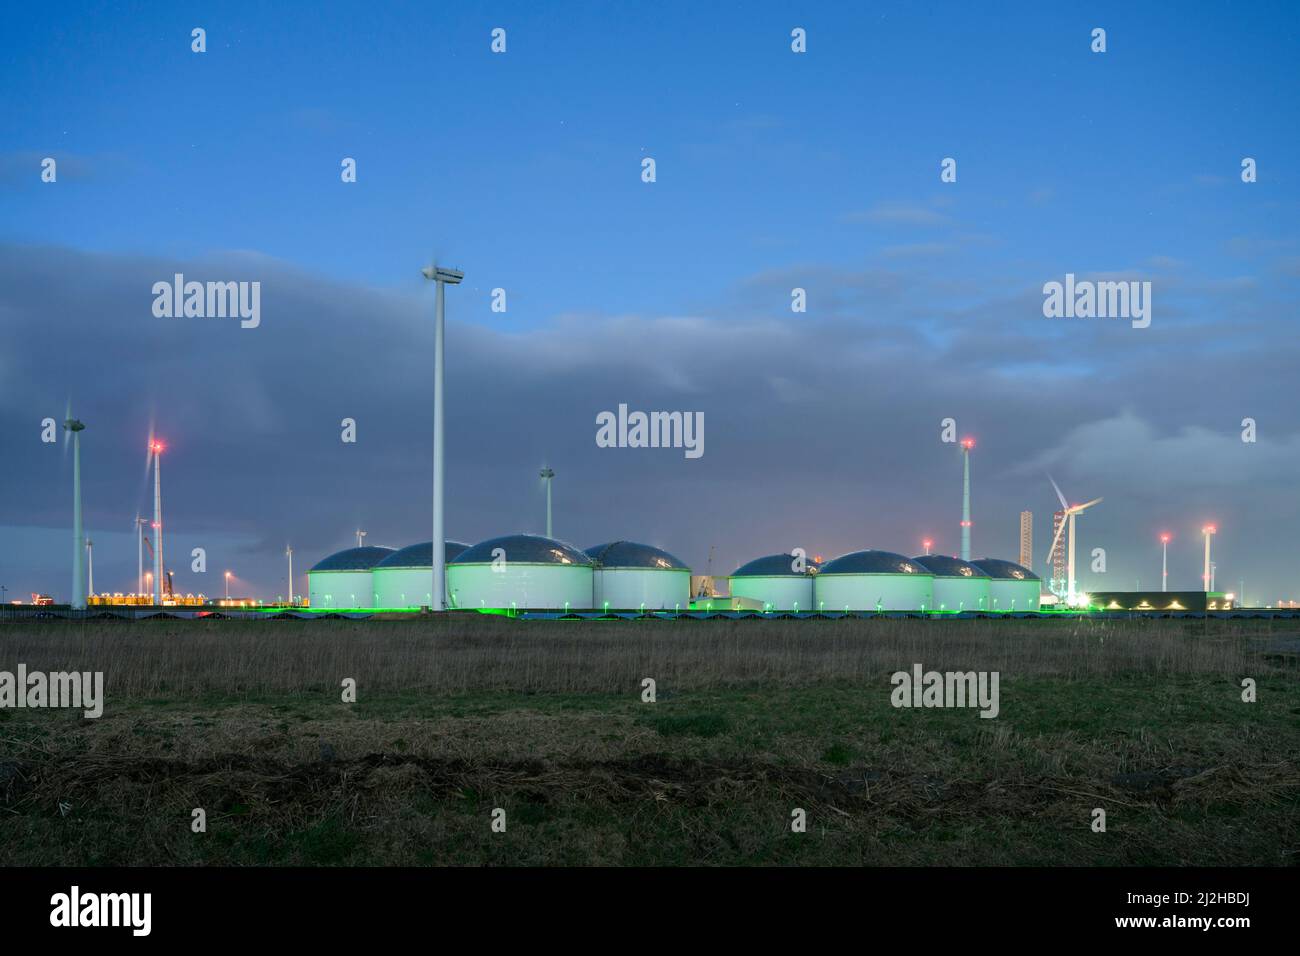 Netherlands, Eemshaven, Wind turbines and storage tanks at dusk Stock Photo